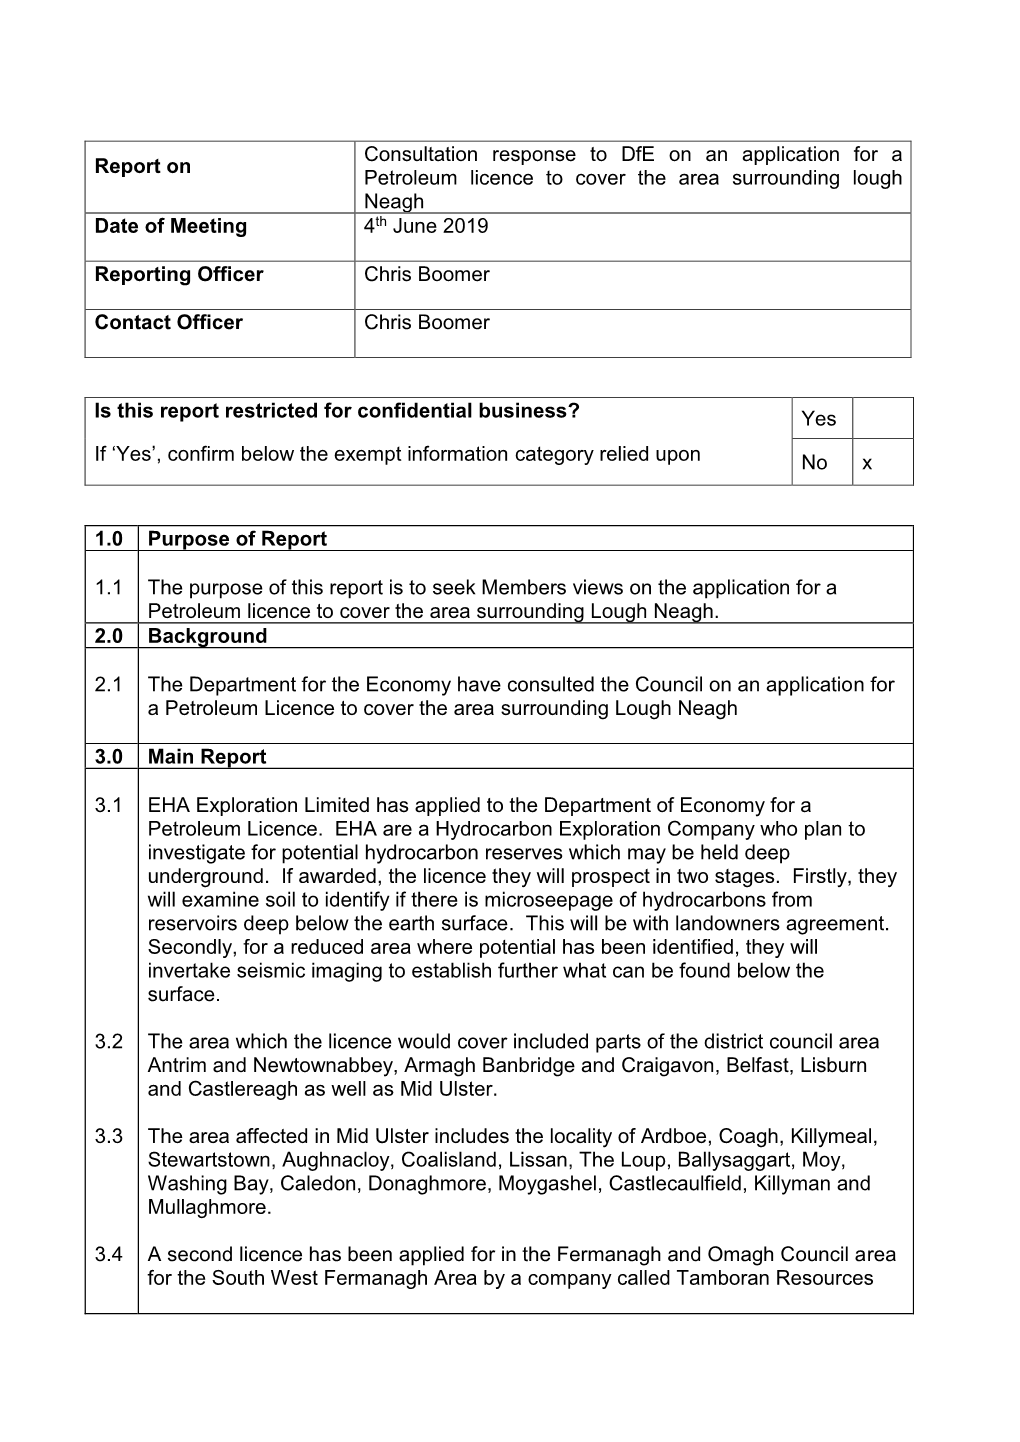 Report on Consultation Response to Dfe on an Application for A